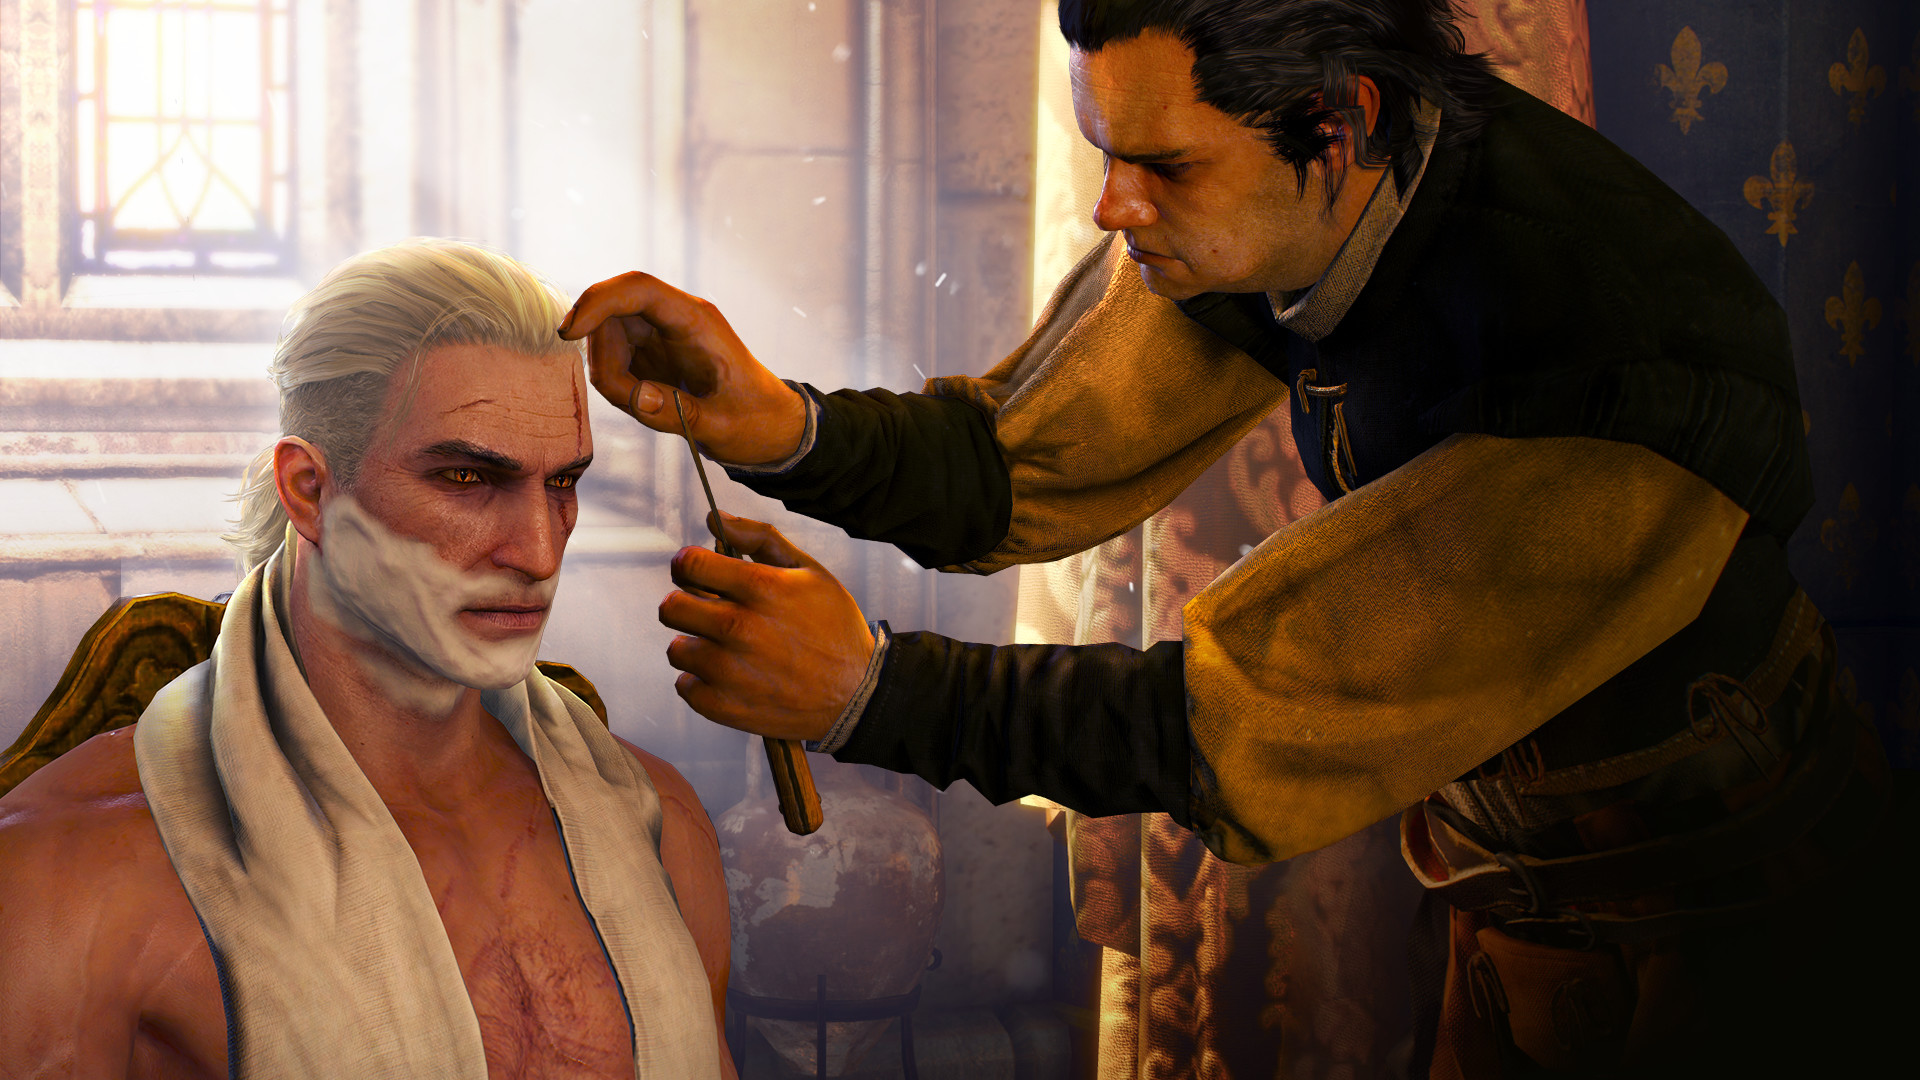 The Witcher 3: Wild Hunt - Beard and Hairstyle Set Featured Screenshot #1